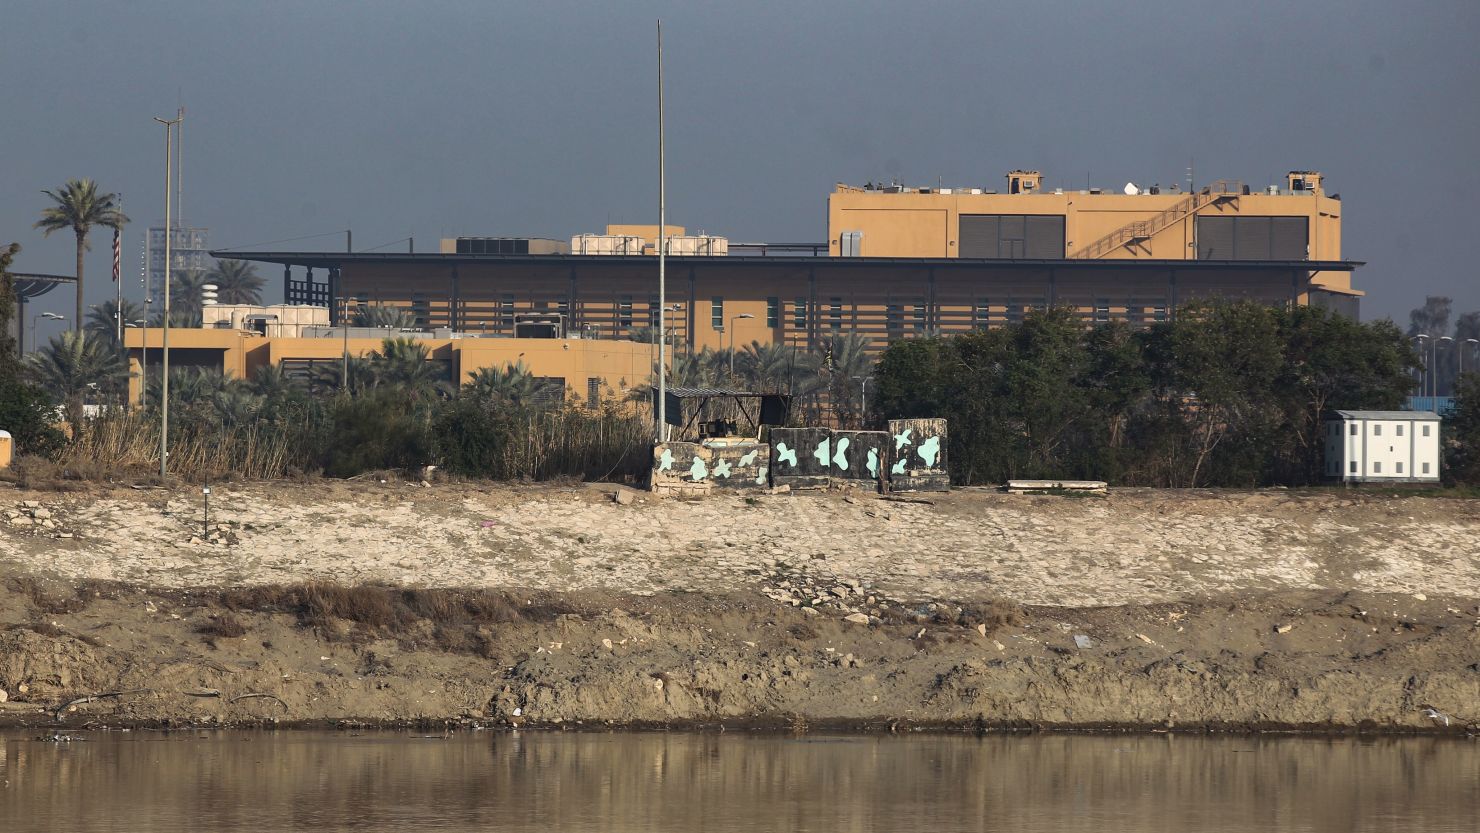 The US embassy across the Tigris river in Iraq's capital Baghdad. File photo from January 2020.